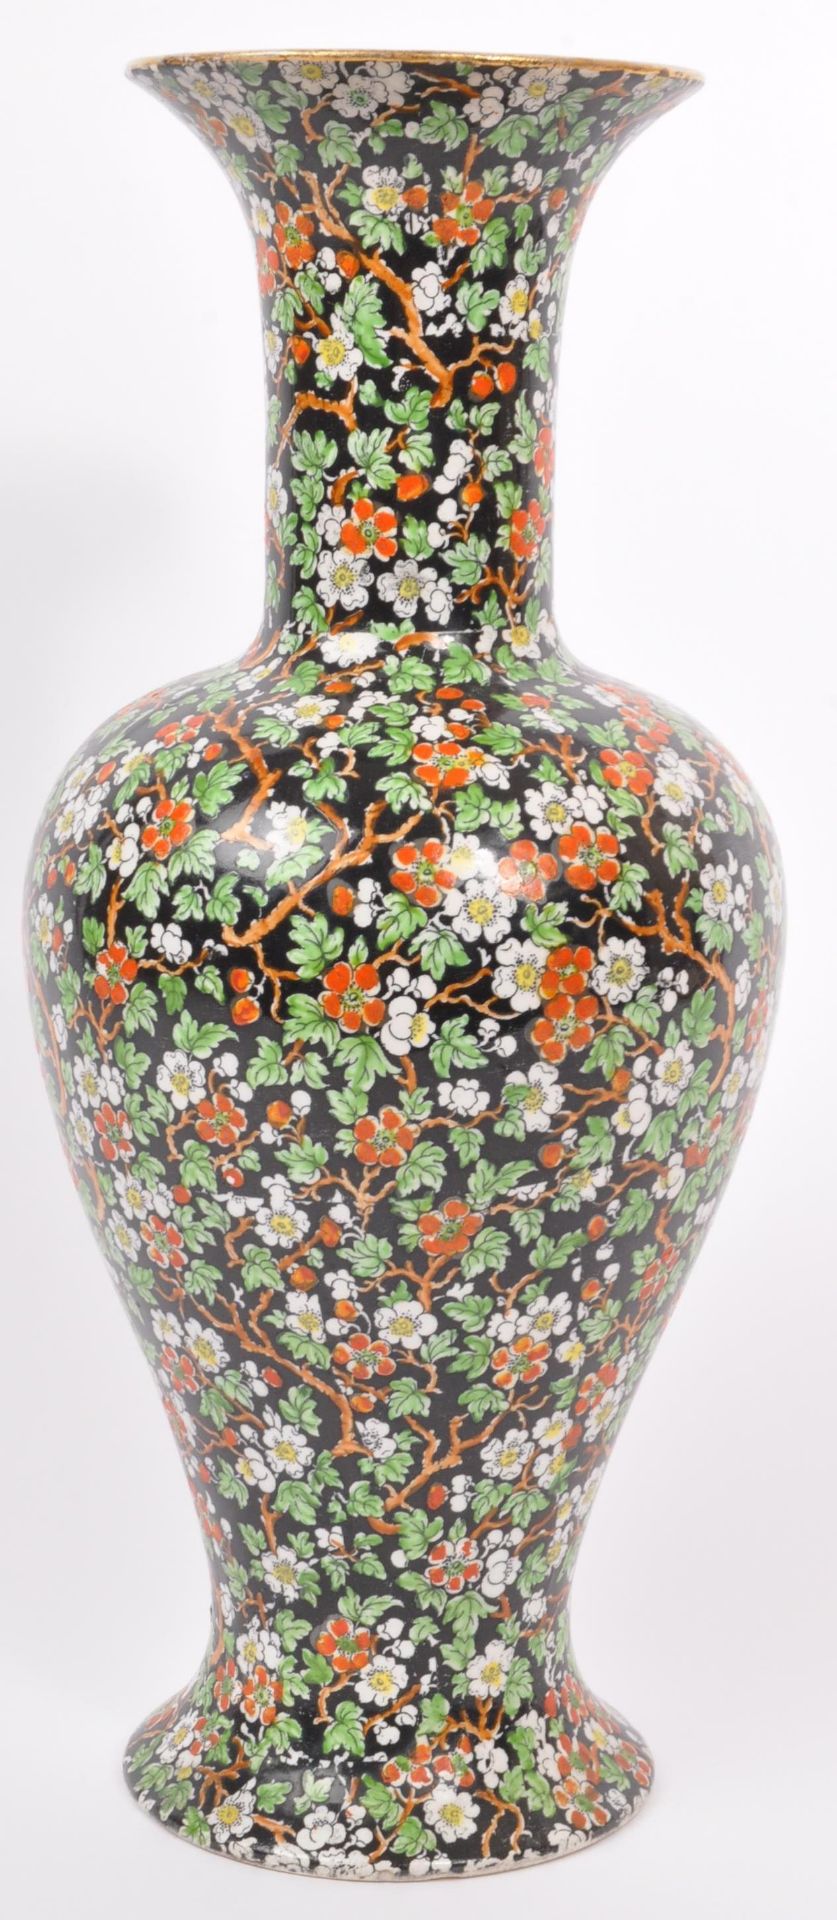 EARLY 19TH CENTURY CHINESE STYLE BALUSTER VASE BY MAYFIELD